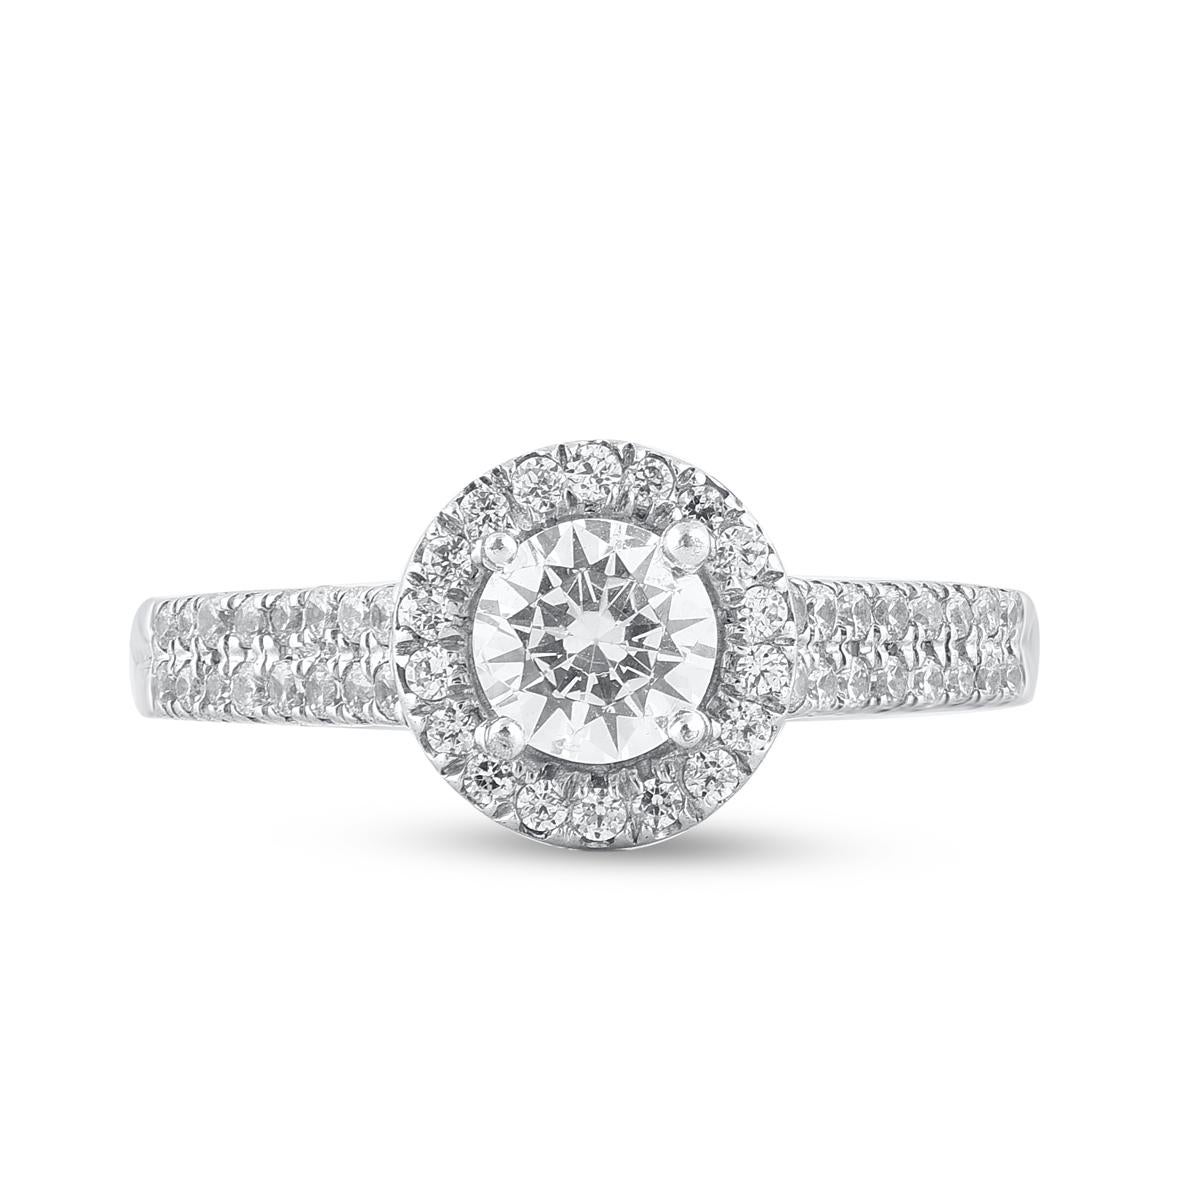 Express your love for her in the most classic way with this halo ring. This ring is expertly crafted in 14 Karat white gold and features of this ring brilliant cut 51 diamond set in pave setting. Total diamond weight is 1.0 carat. The diamonds are